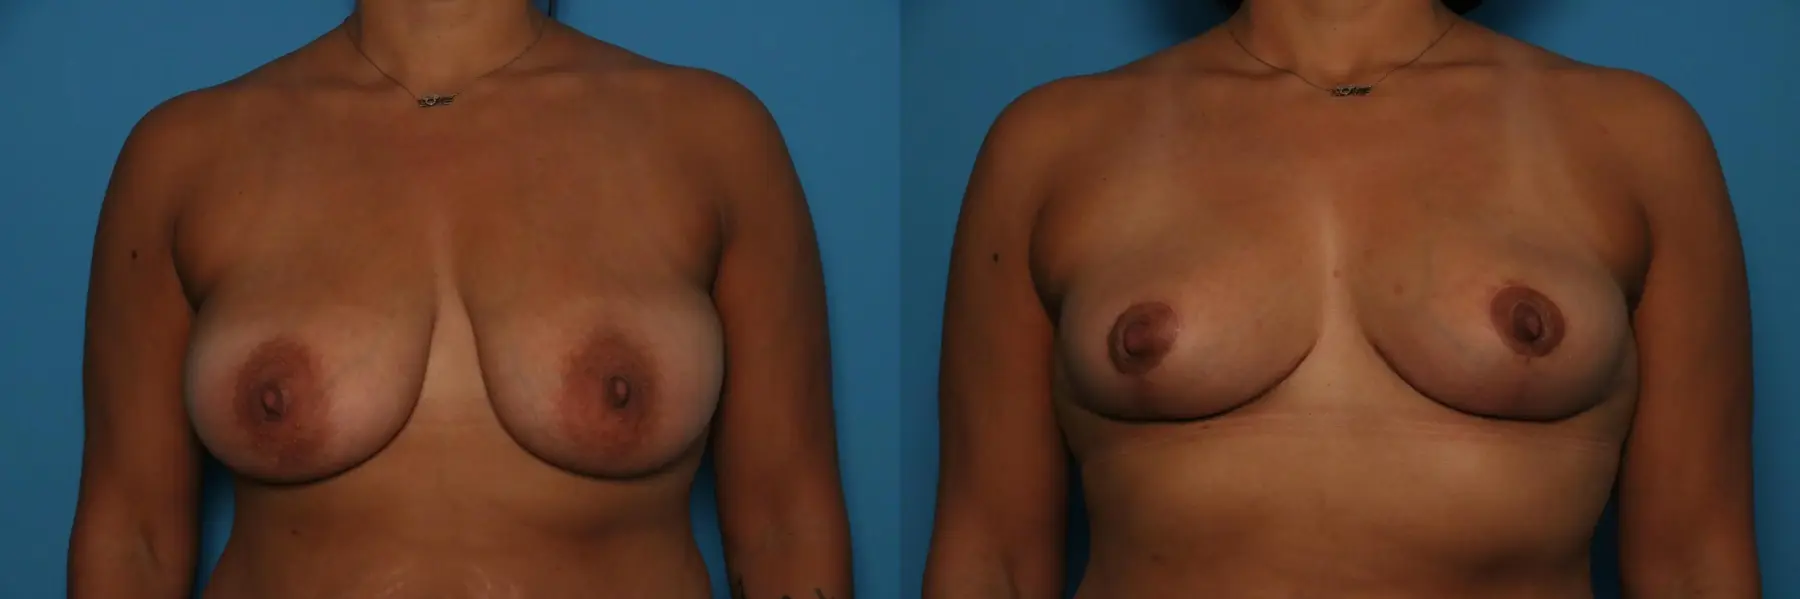 Breast Lift-Reduction: Patient 10 - Before and After  